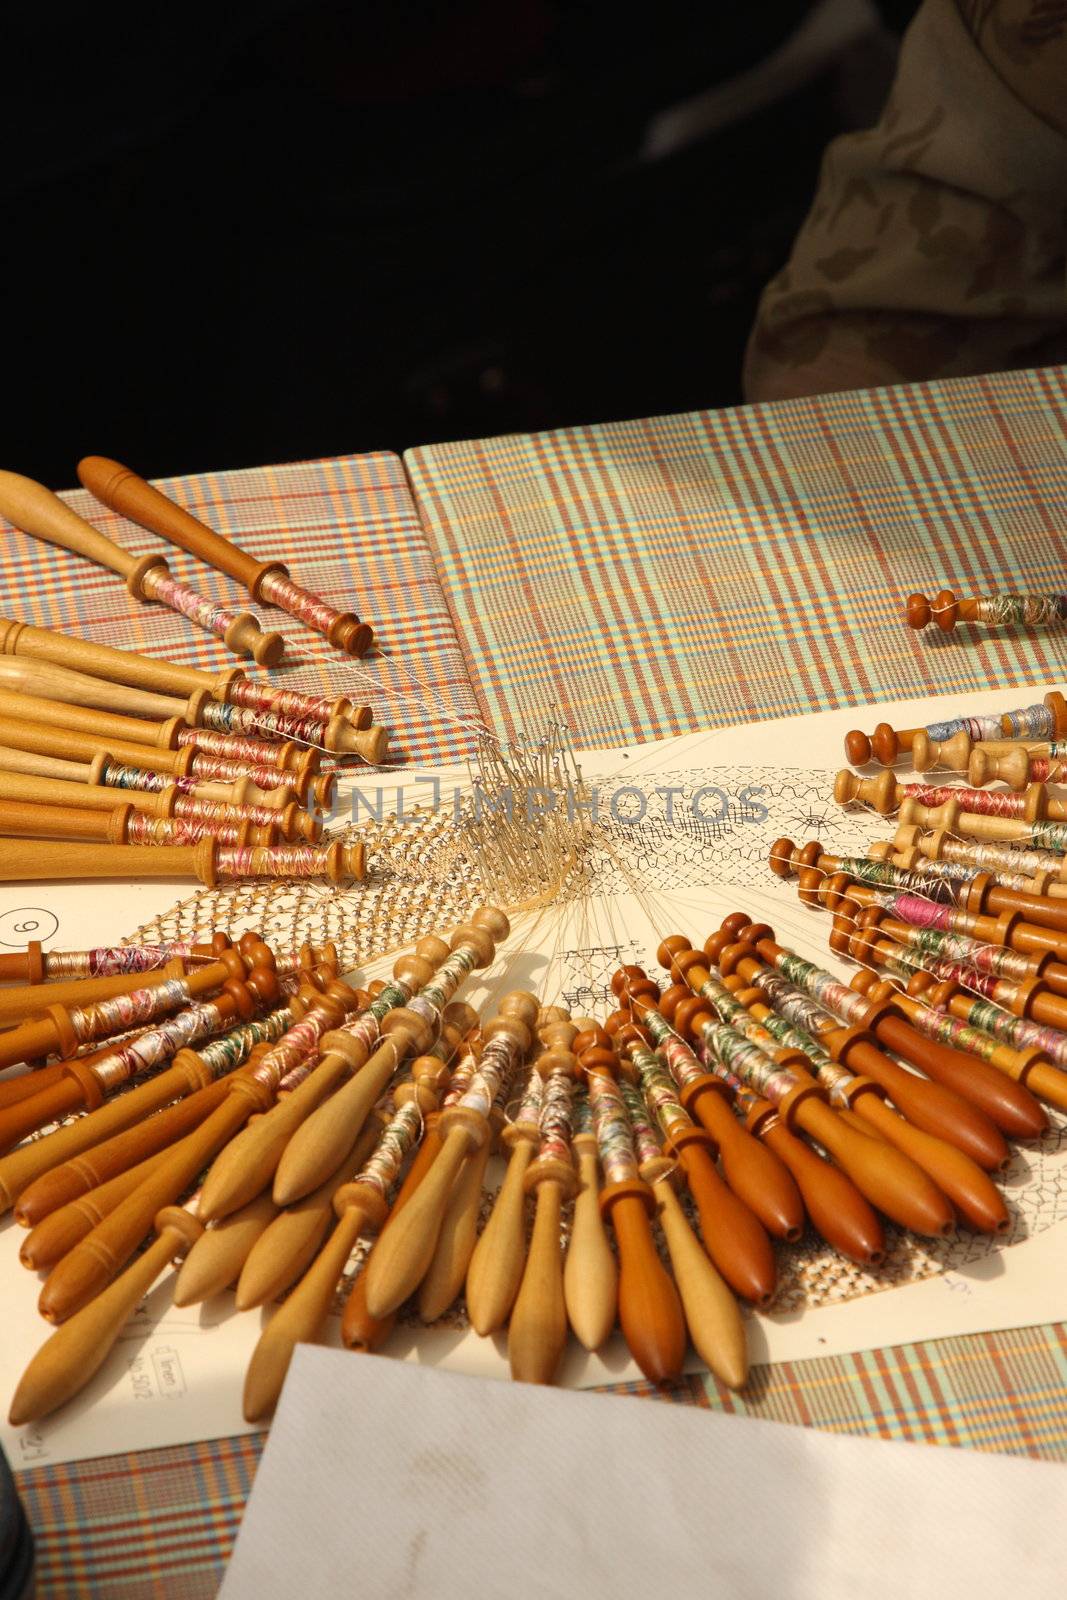 Process of lace-making with bobbins 